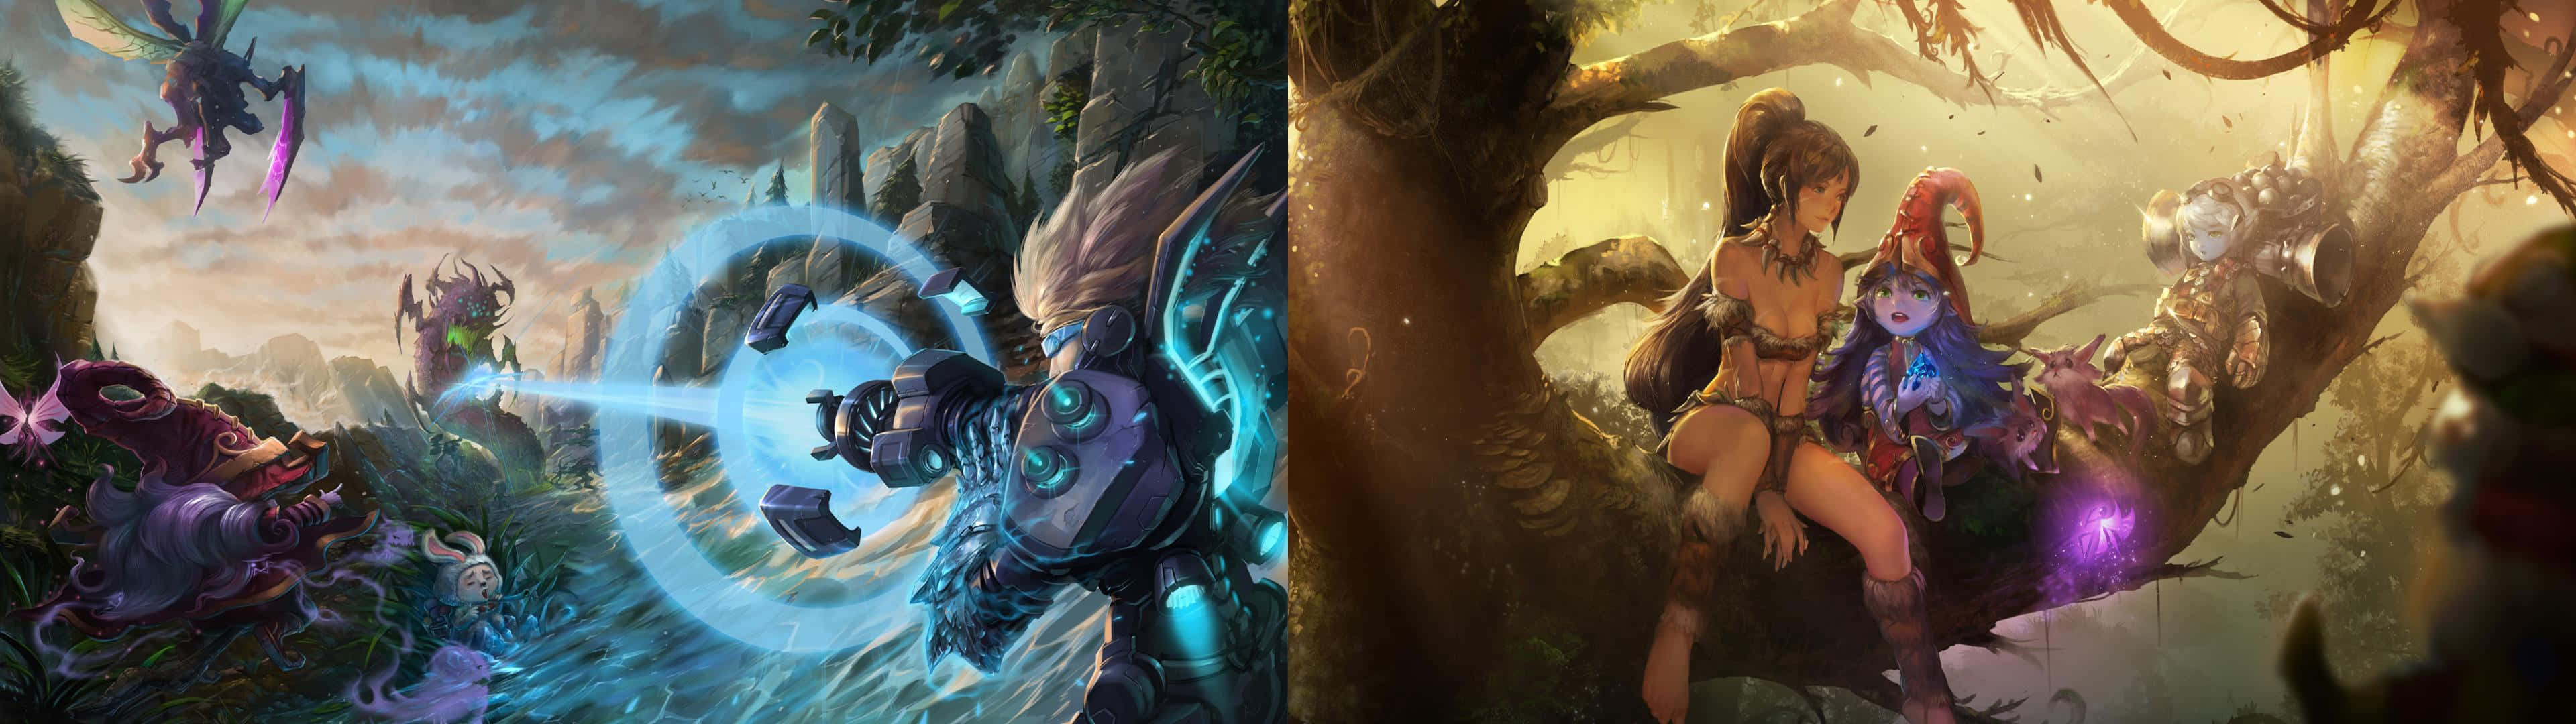 Conquer the Rift with This Intense League of Legends Scene Wallpaper